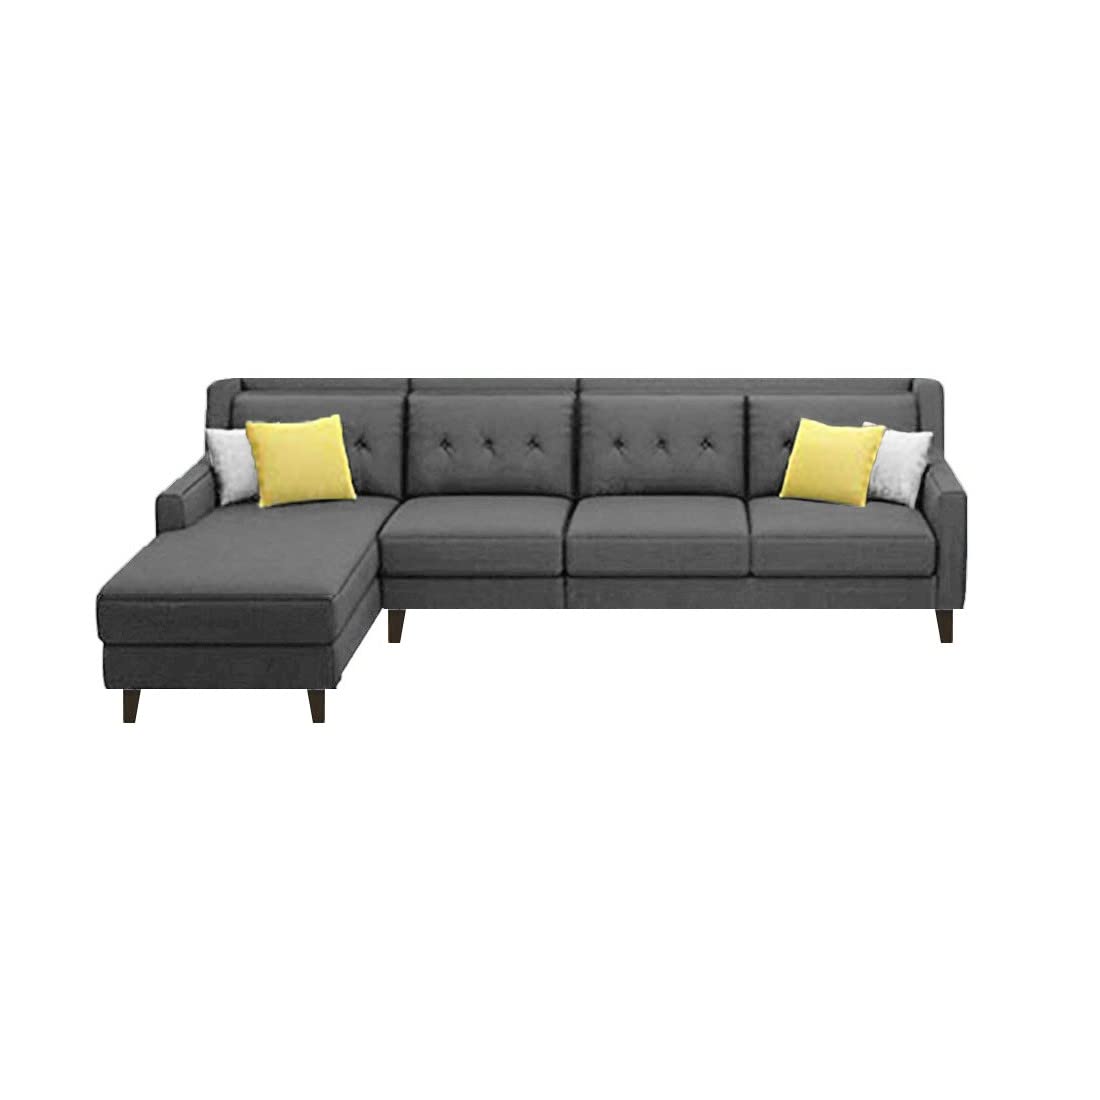 Torque India Milner L Shape 6 Seater Fabric Sofa with Ottoman For Living Room - Torque India